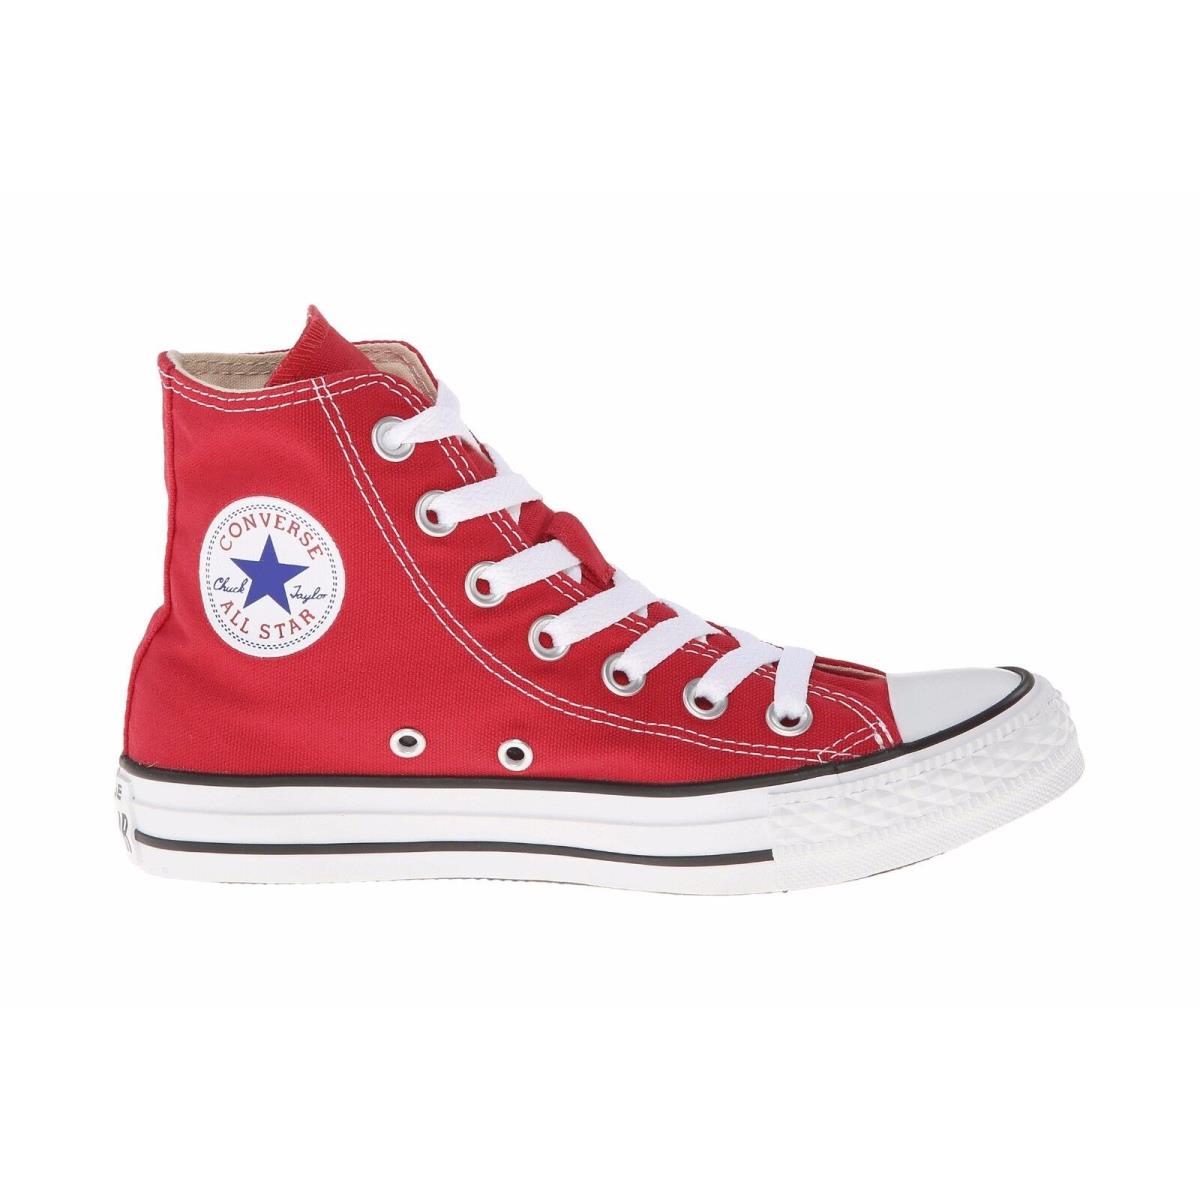 Converse All Star Chuck Taylor Red Hi Top Canvas Women`s Shoes Sneakers M9621